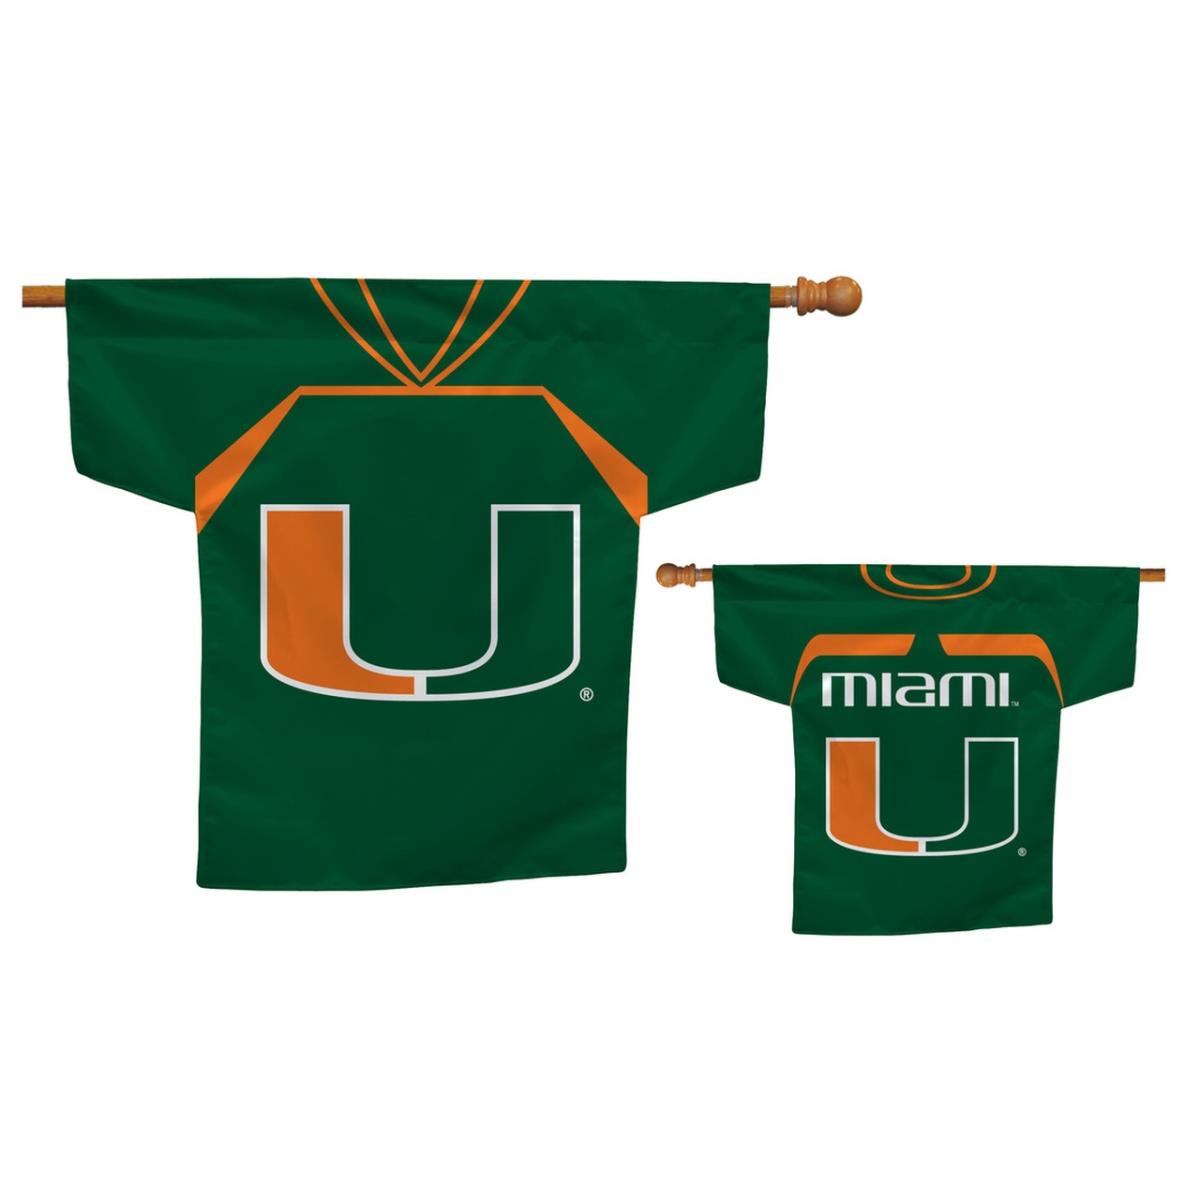 Picture of Fremont Die 2324553938 Miami Hurricanes Flag - Jersey Design